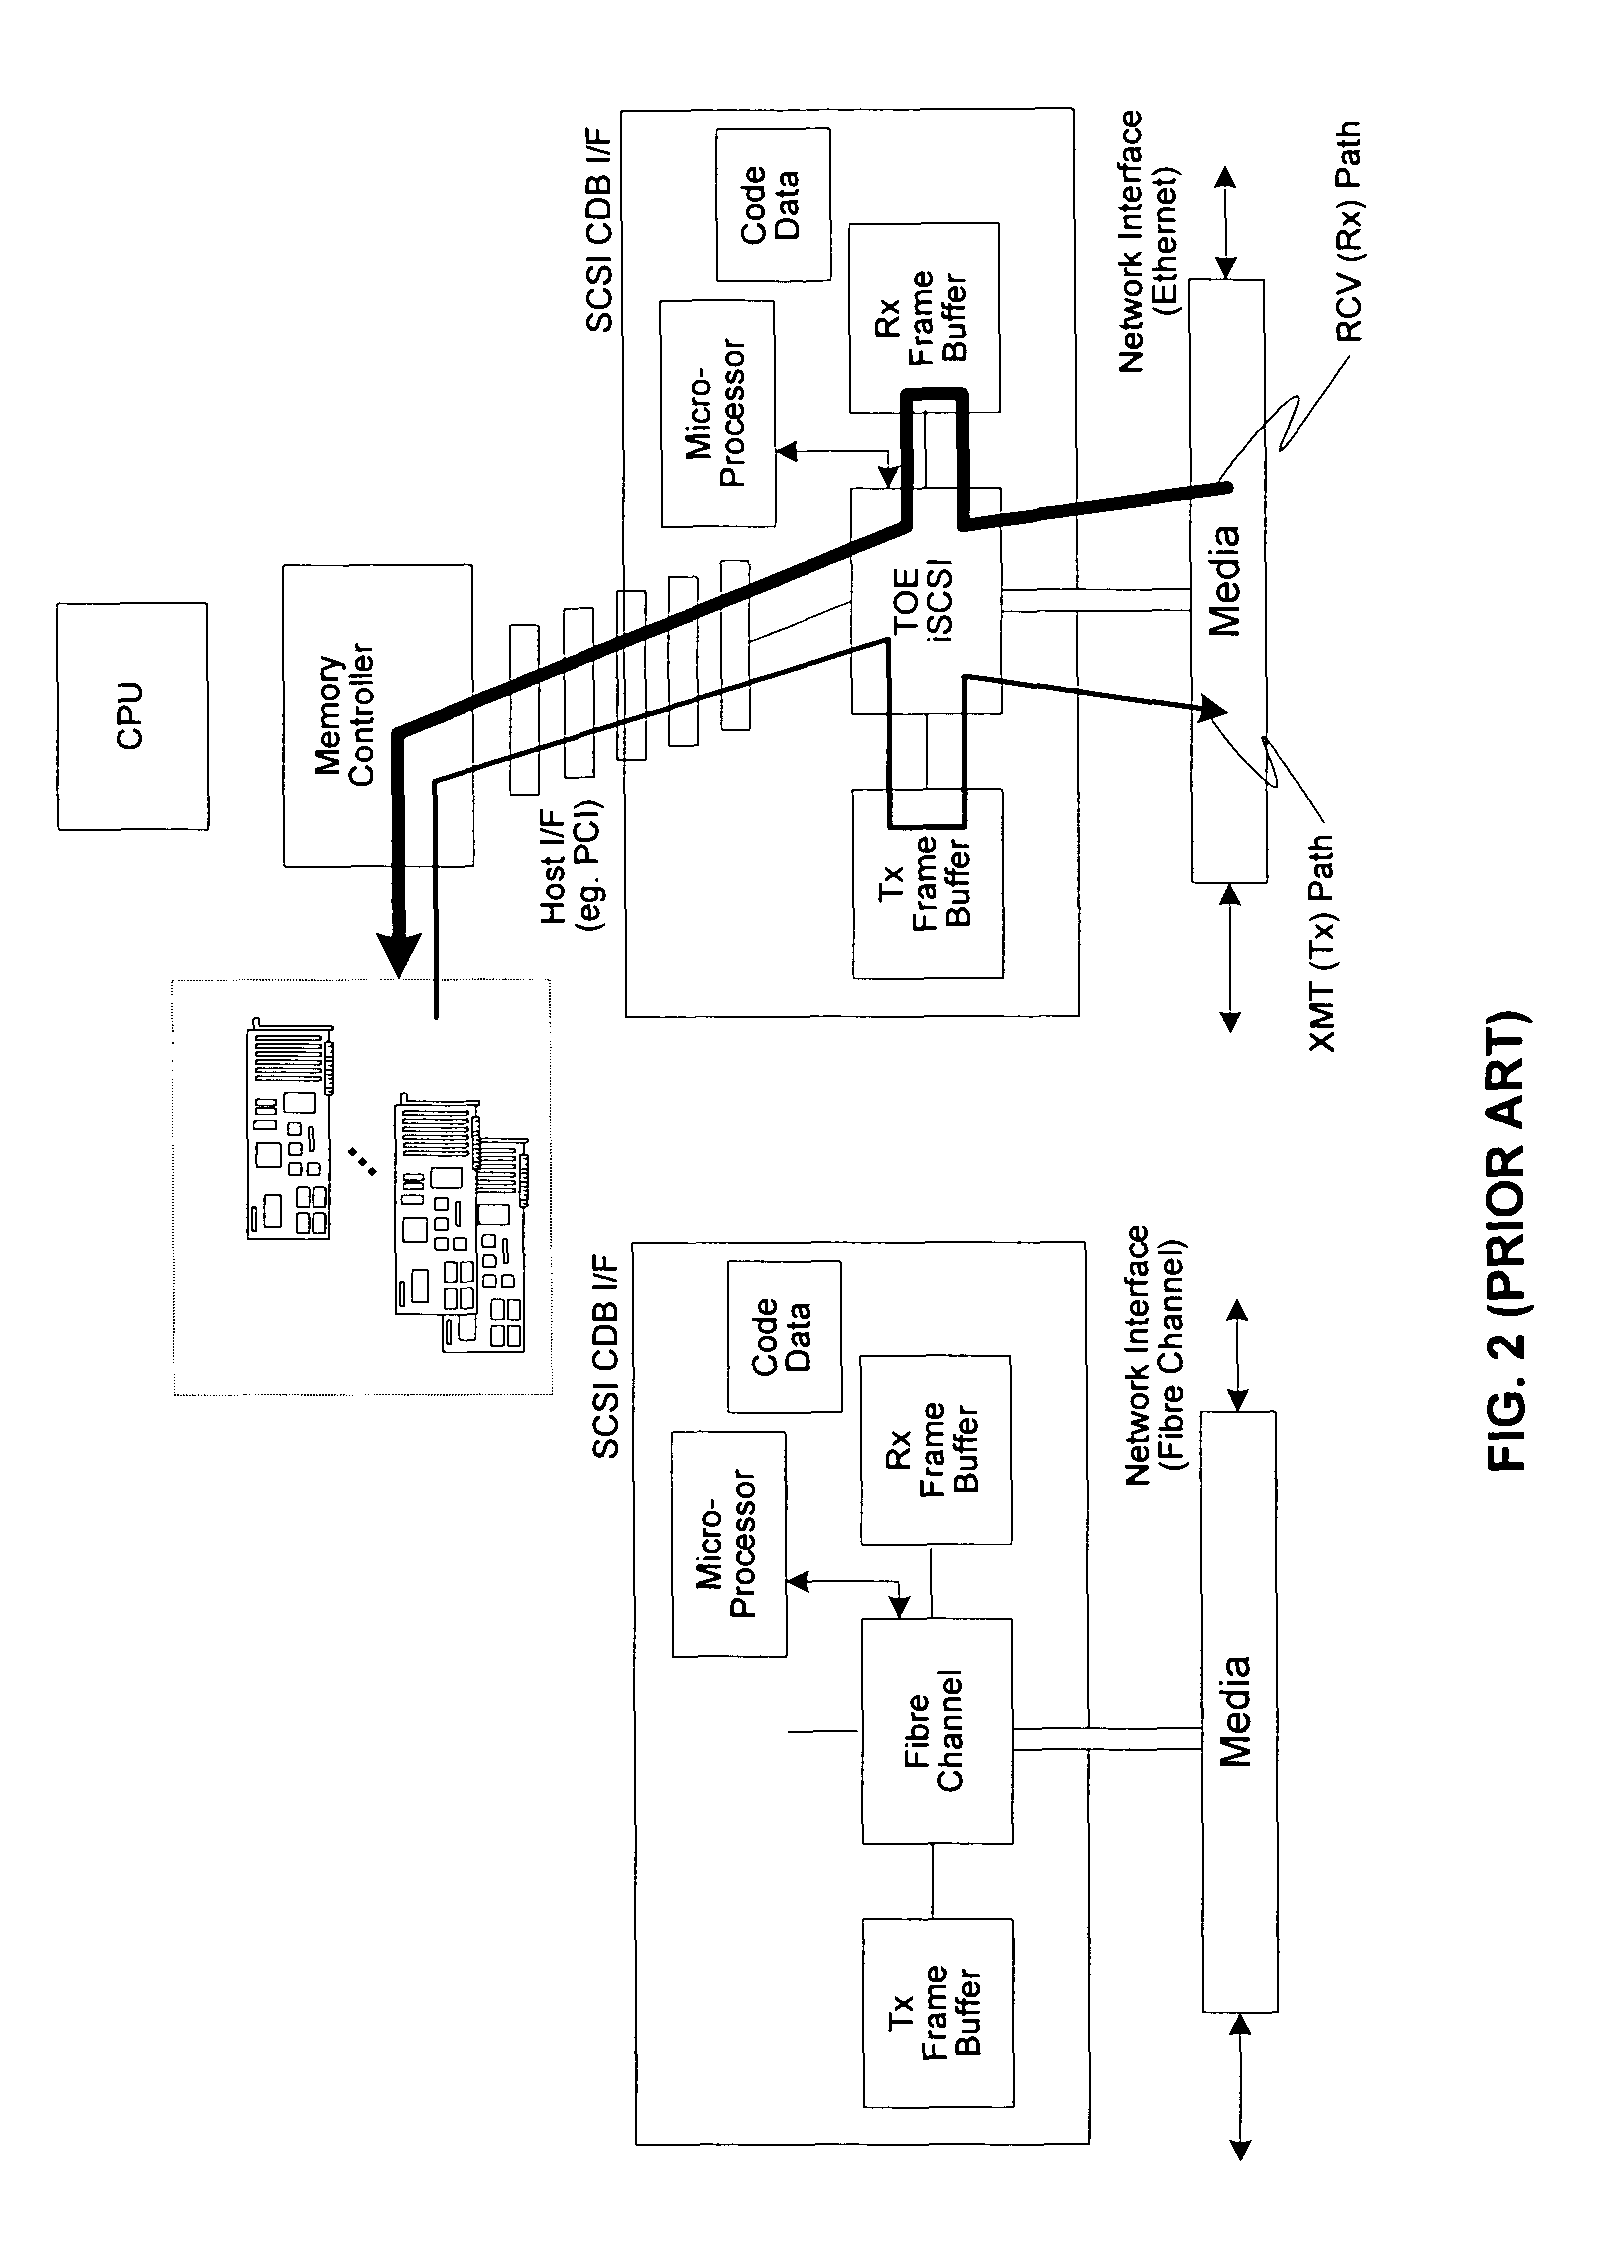 System and method for network interfacing